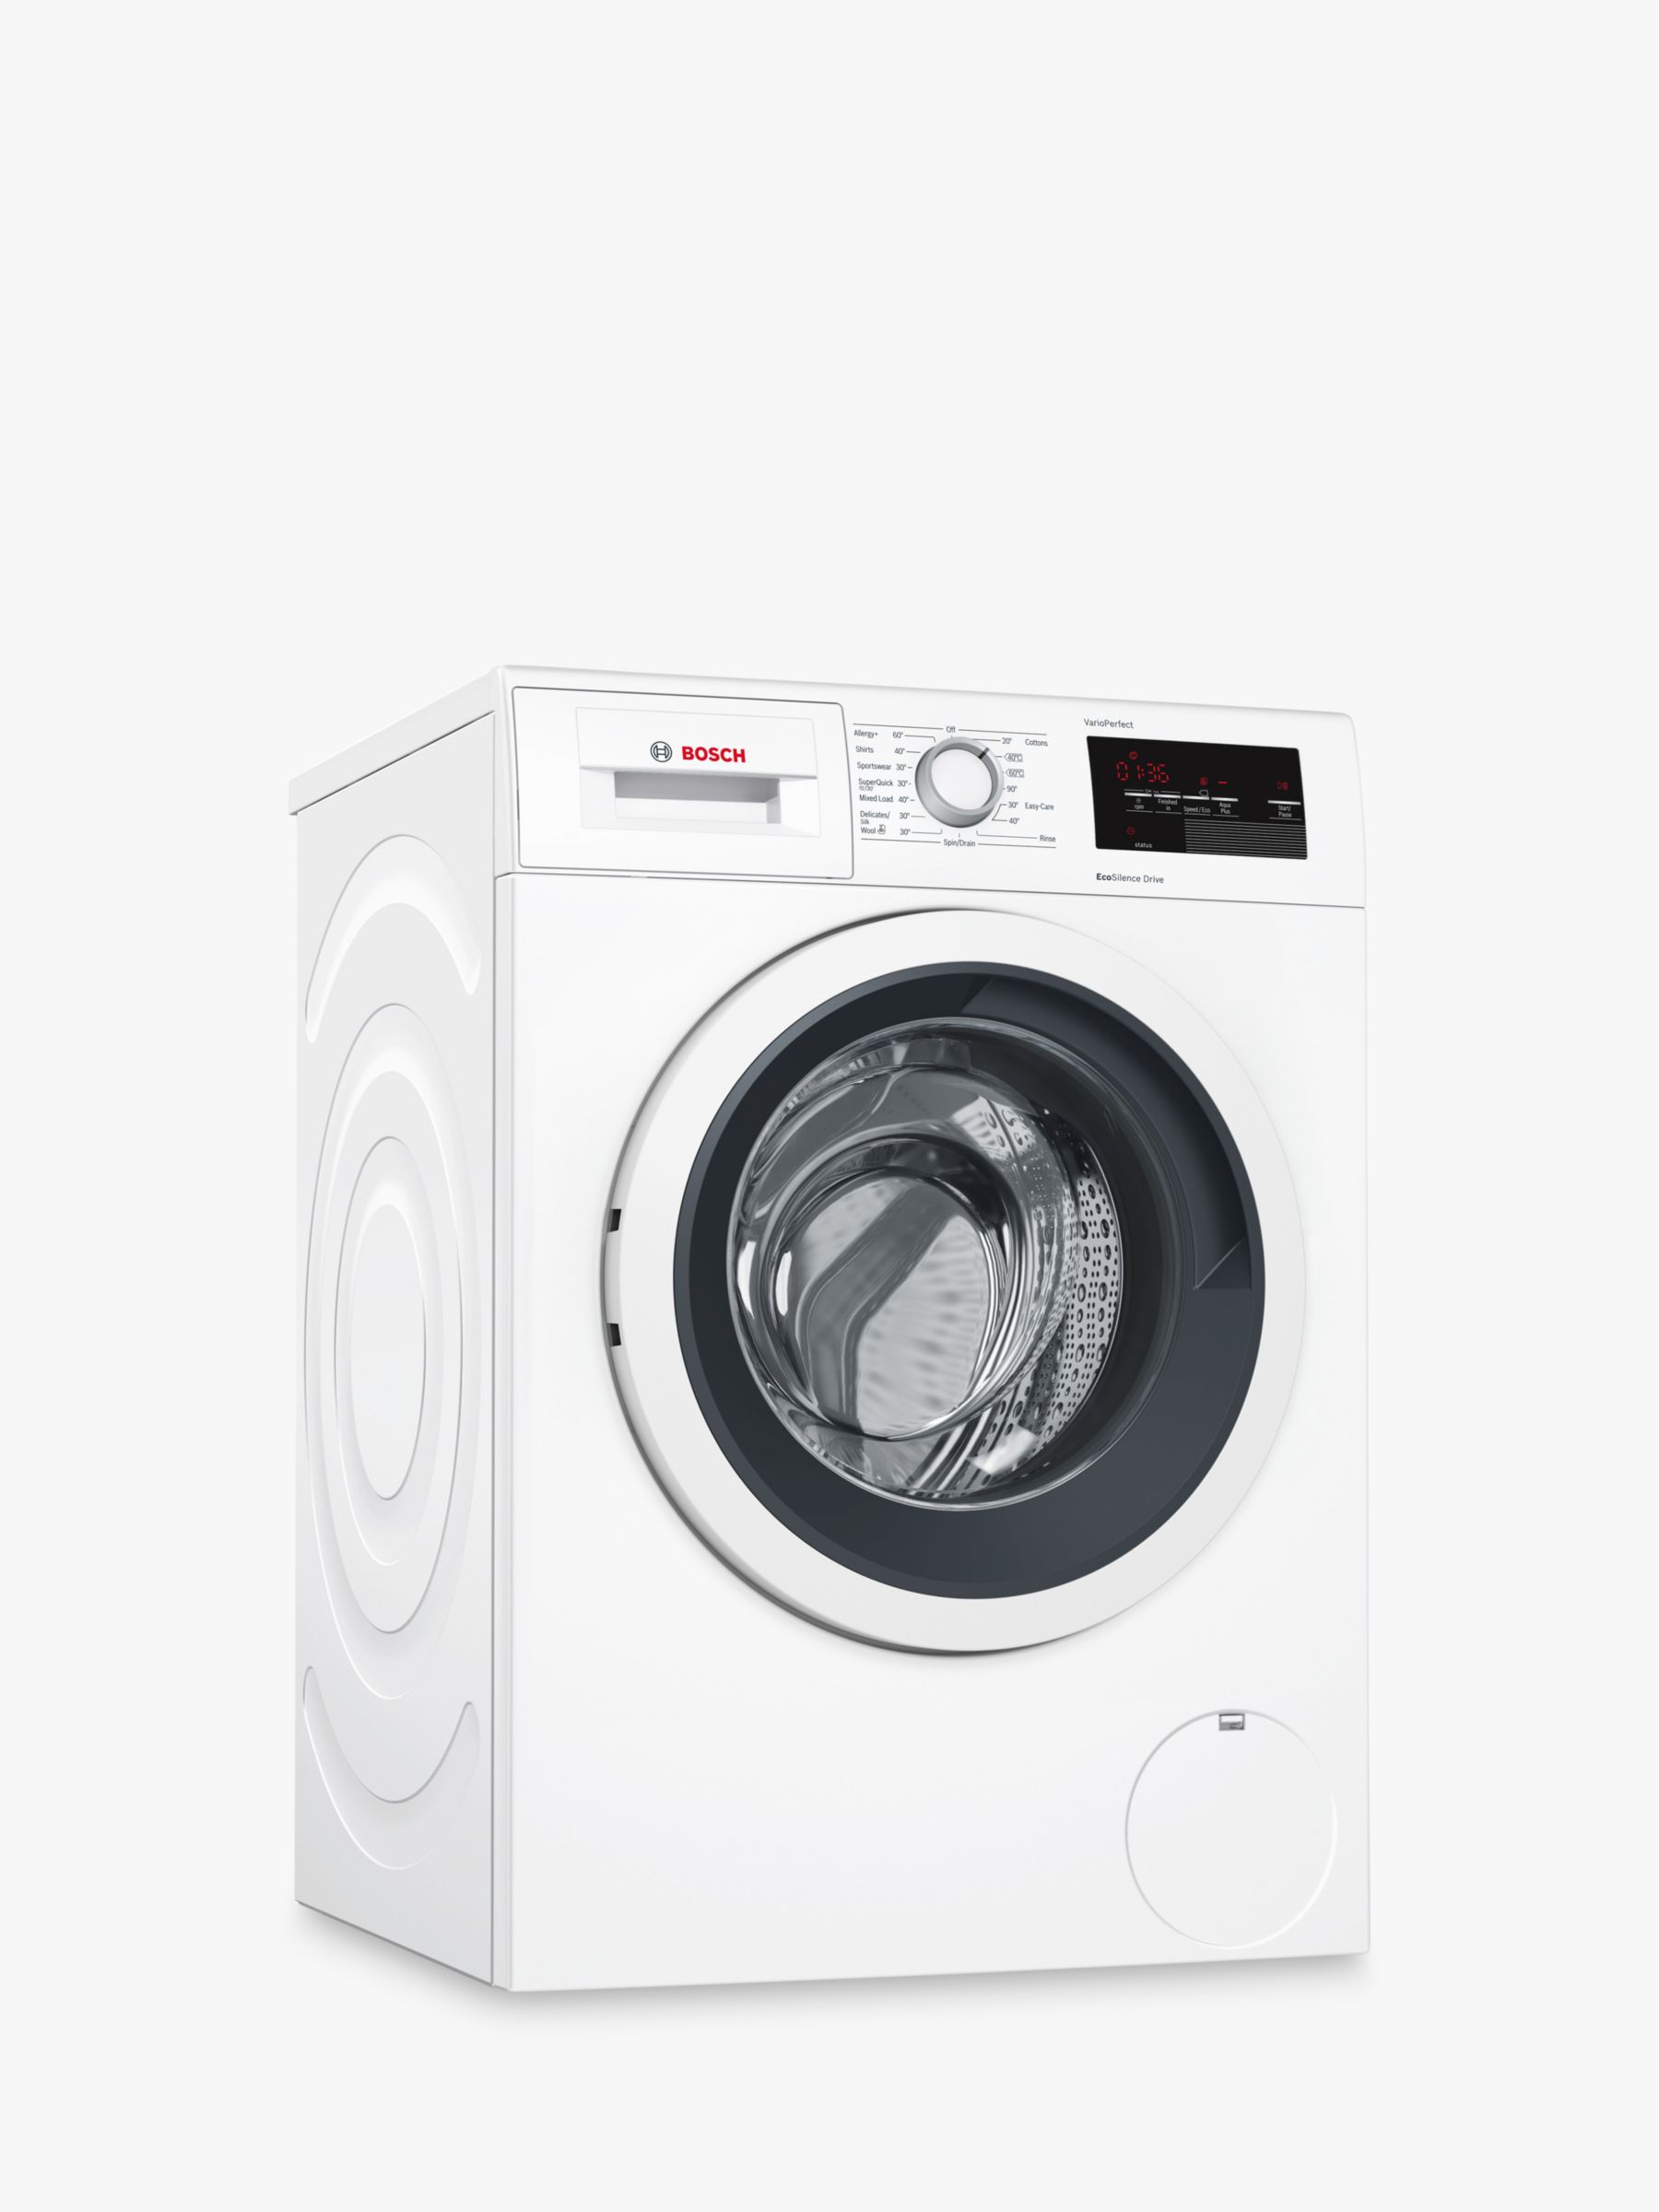 Bosch WAT28371GB Freestanding Washing Machine, 9kg Load, A+++ Energy Rating, 1400rpm Spin, White